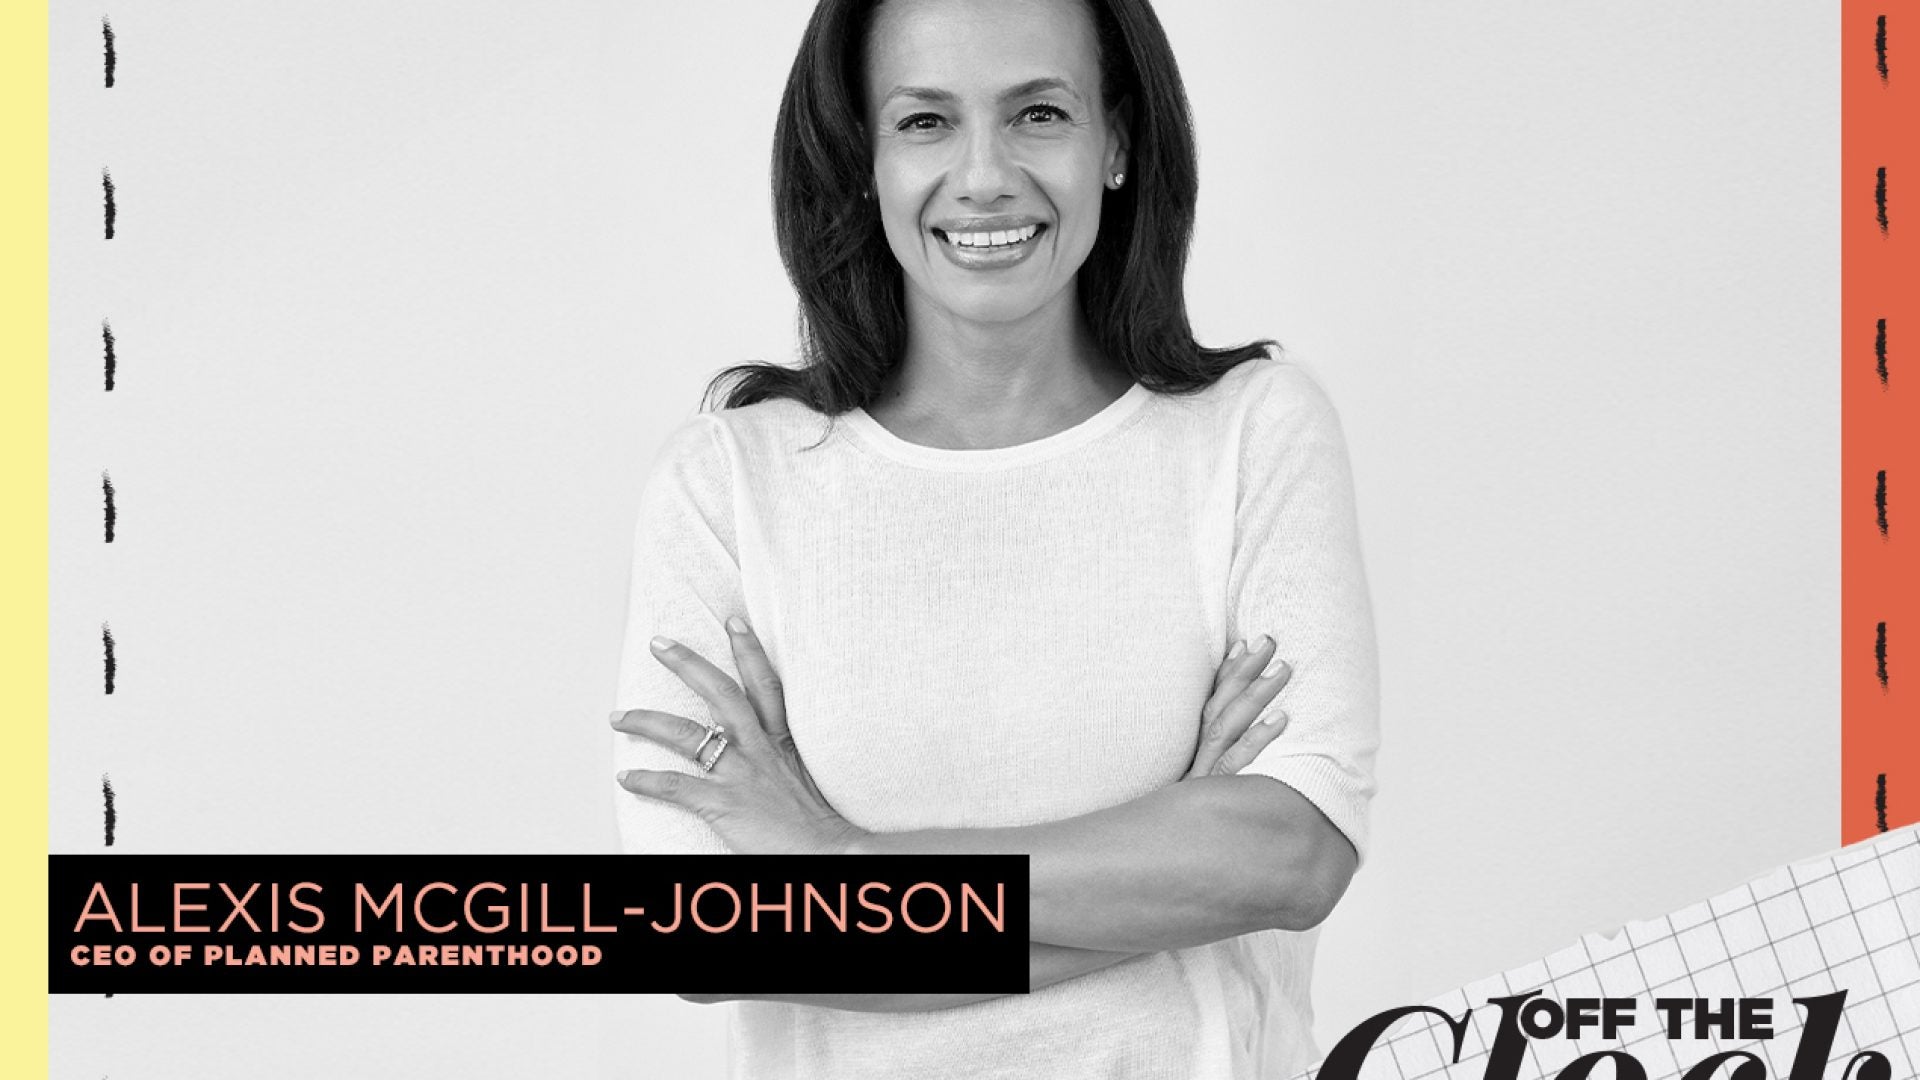 Off The Clock With Alexis McGill-Johnson, CEO of Planned Parenthood